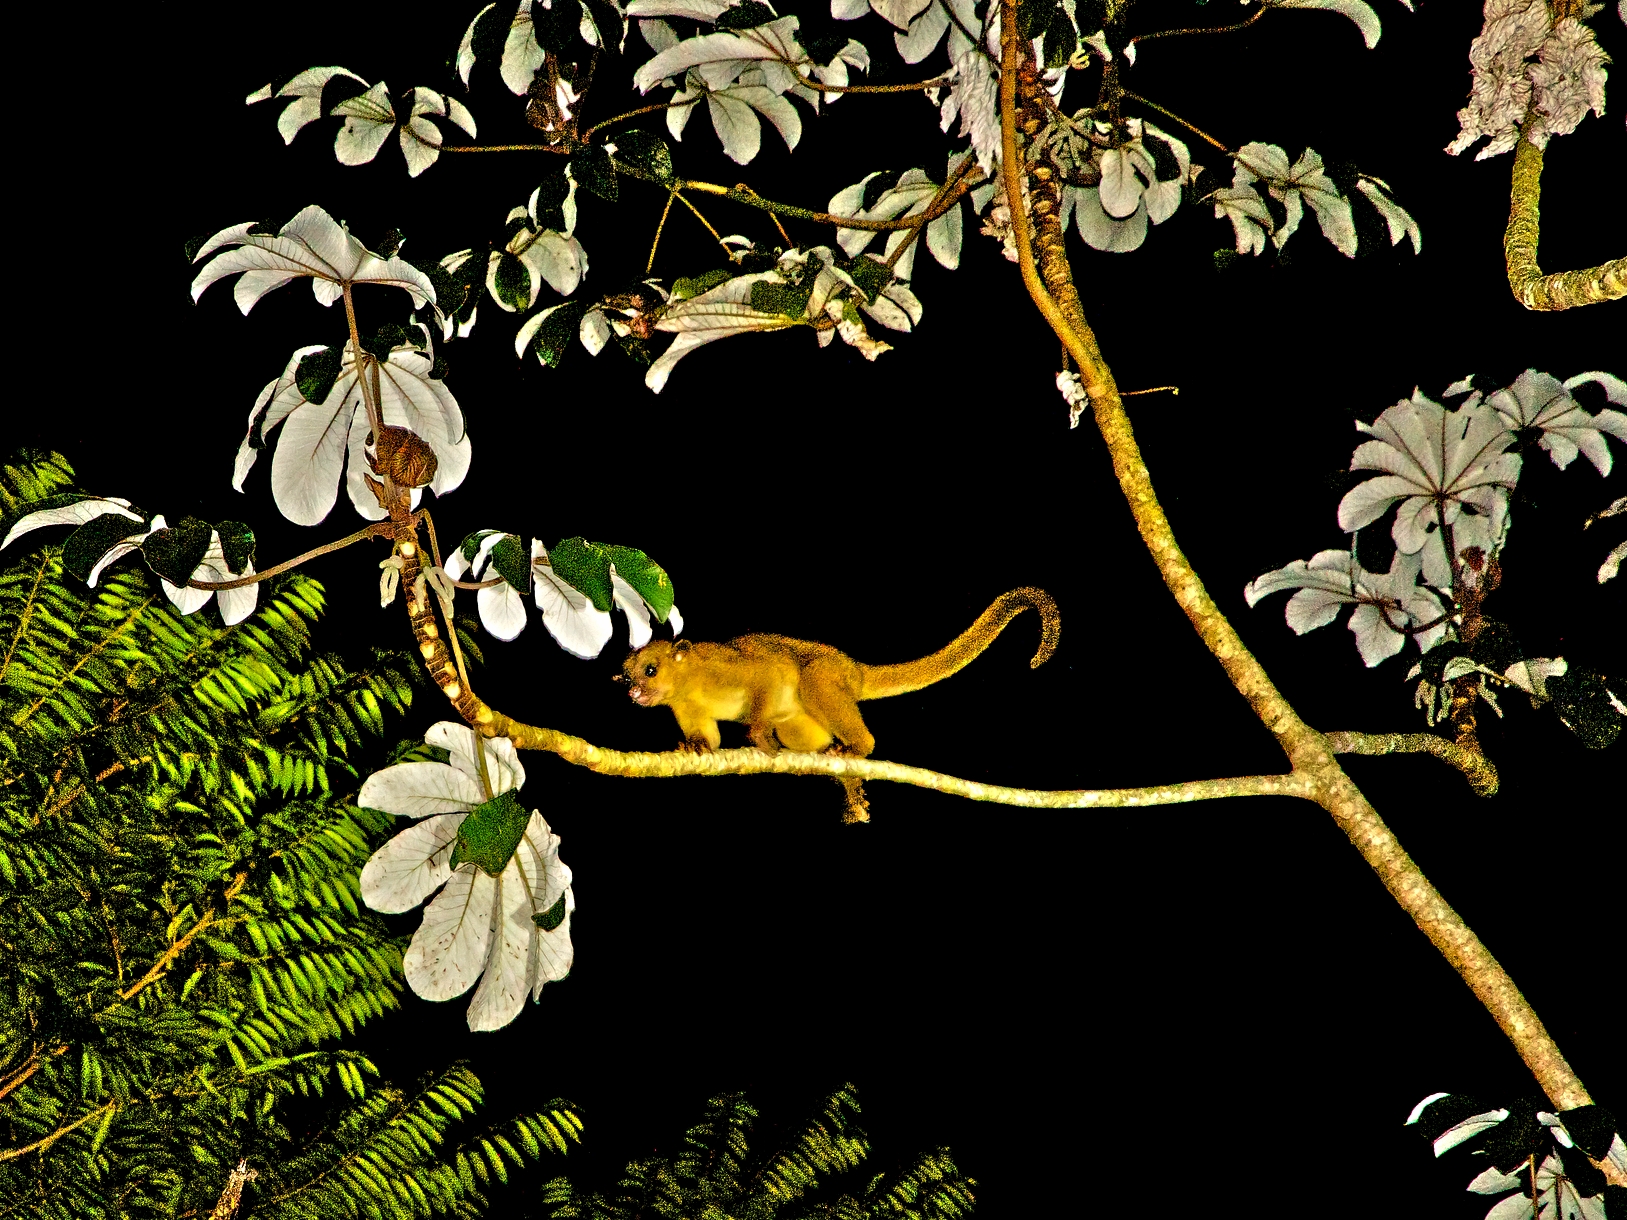 Kinkajou - Cayo District - Belize Vacation Packages - SabreWing Travel - Photo by David Berg